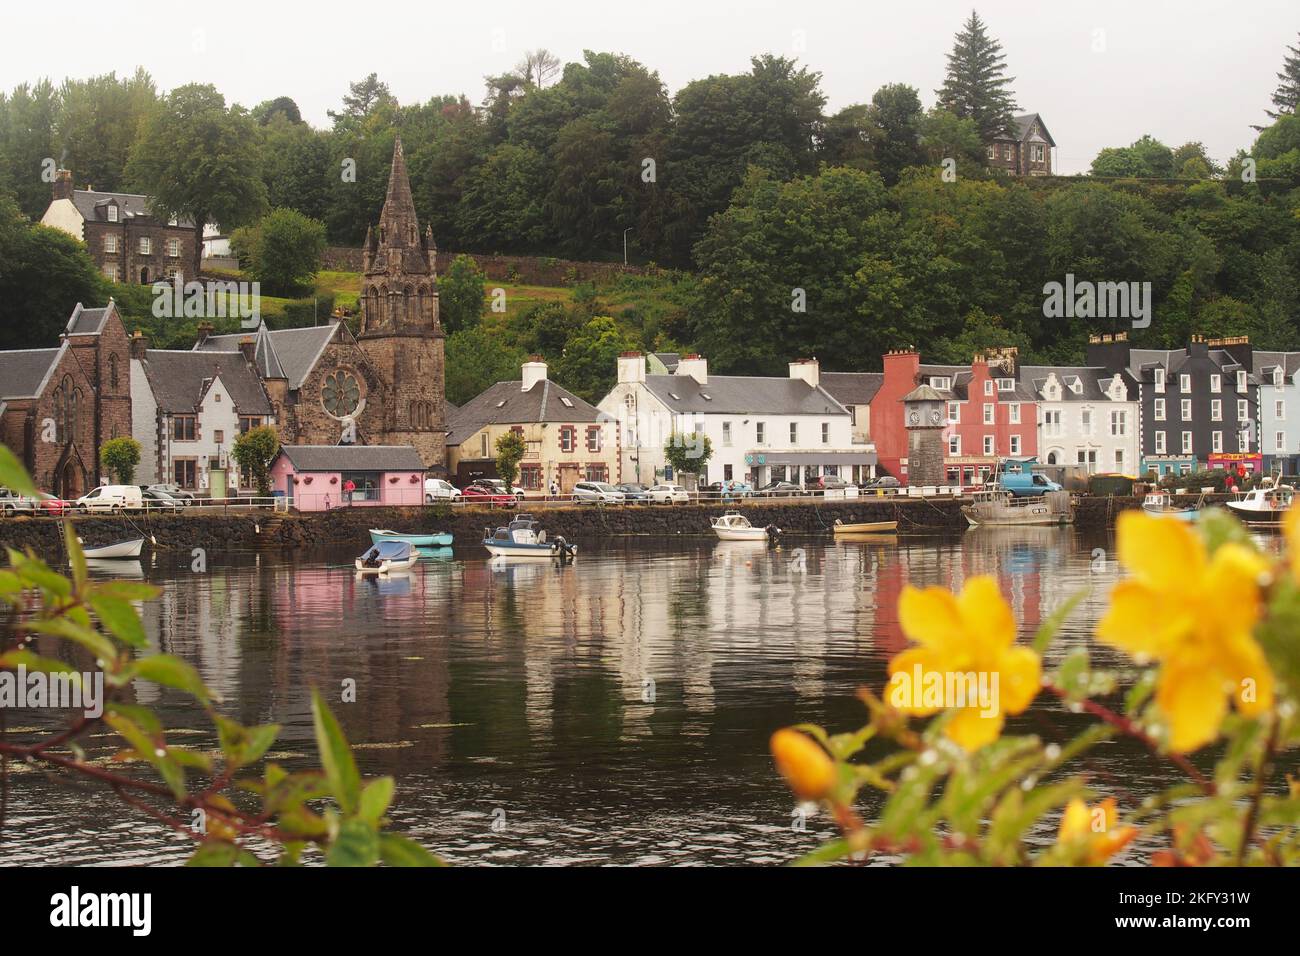 A view across the sea front at Tobermory, Mull, Scotland showing the colourful row of houses along the harbour wall and steep hill behind Stock Photo